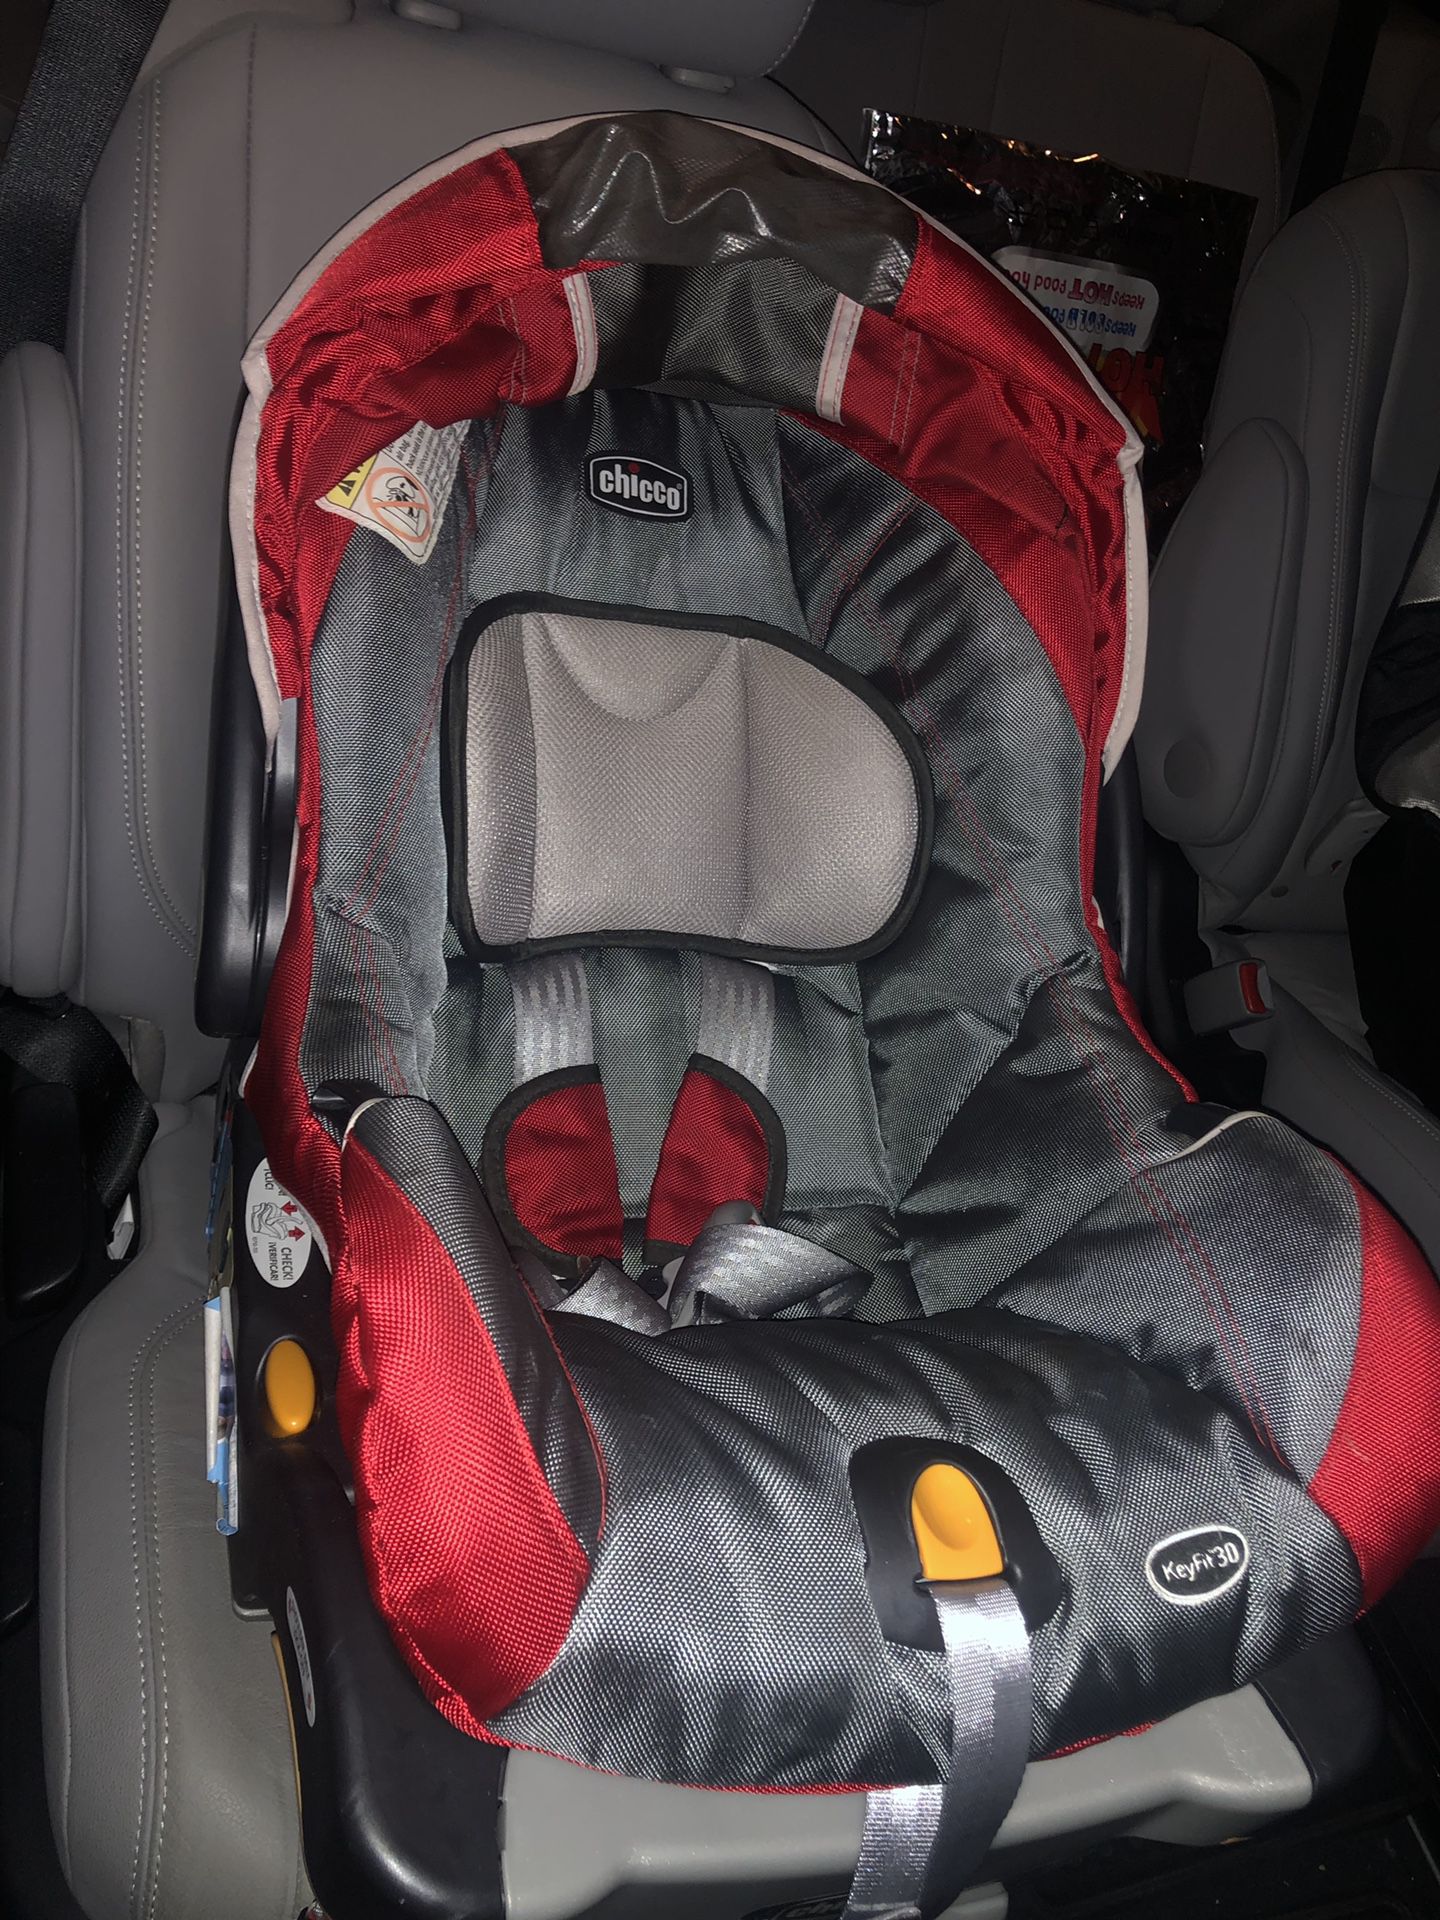 ChicCo key fit 30 car seat